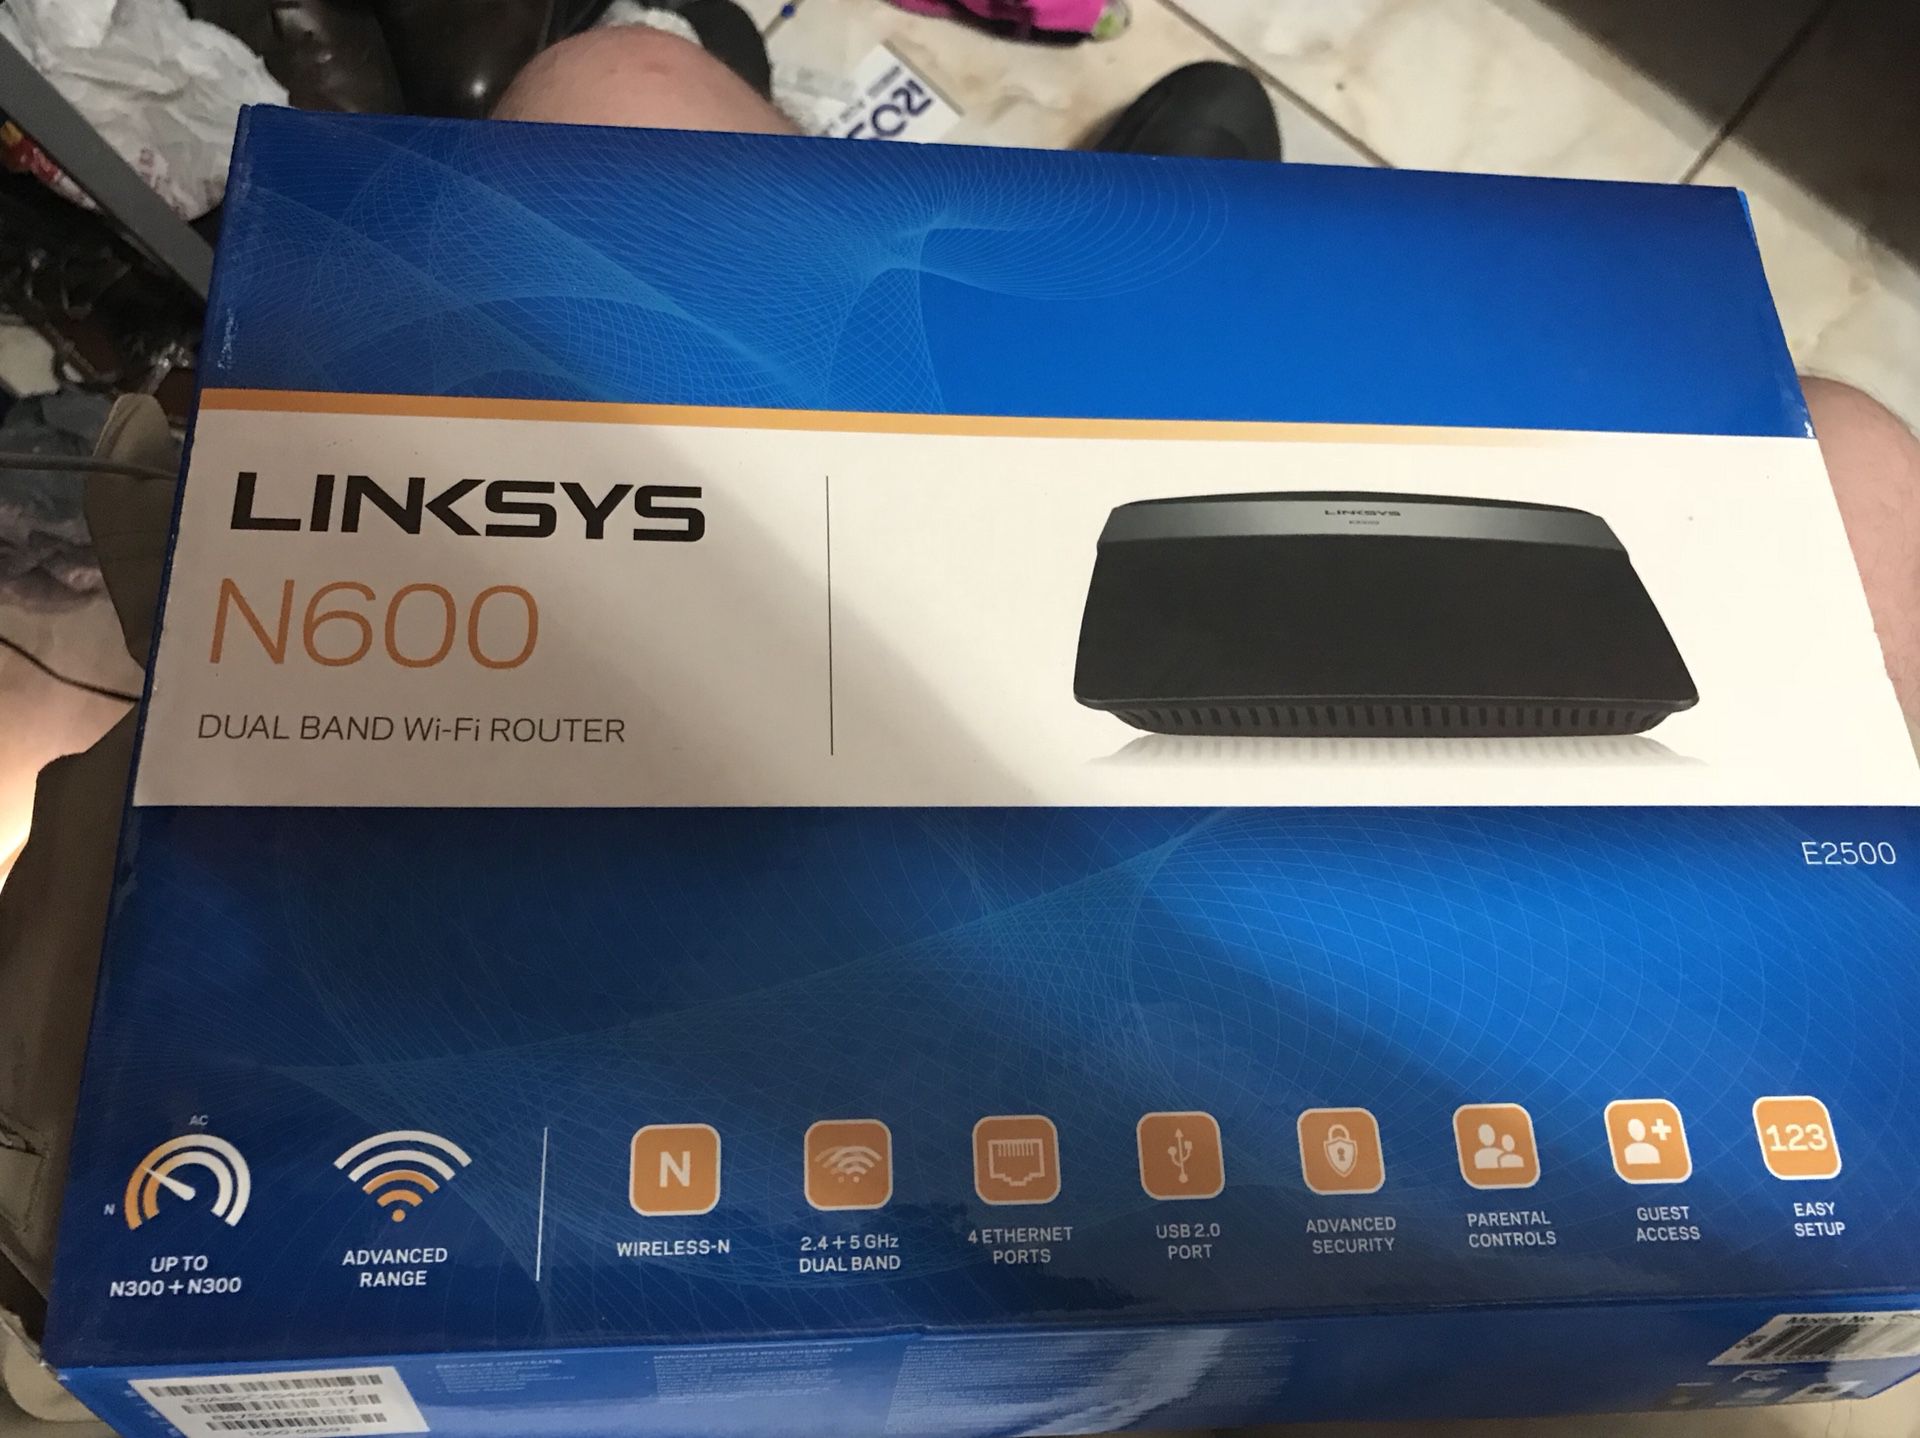 Selling Linksys N600 Dual band WiFi router